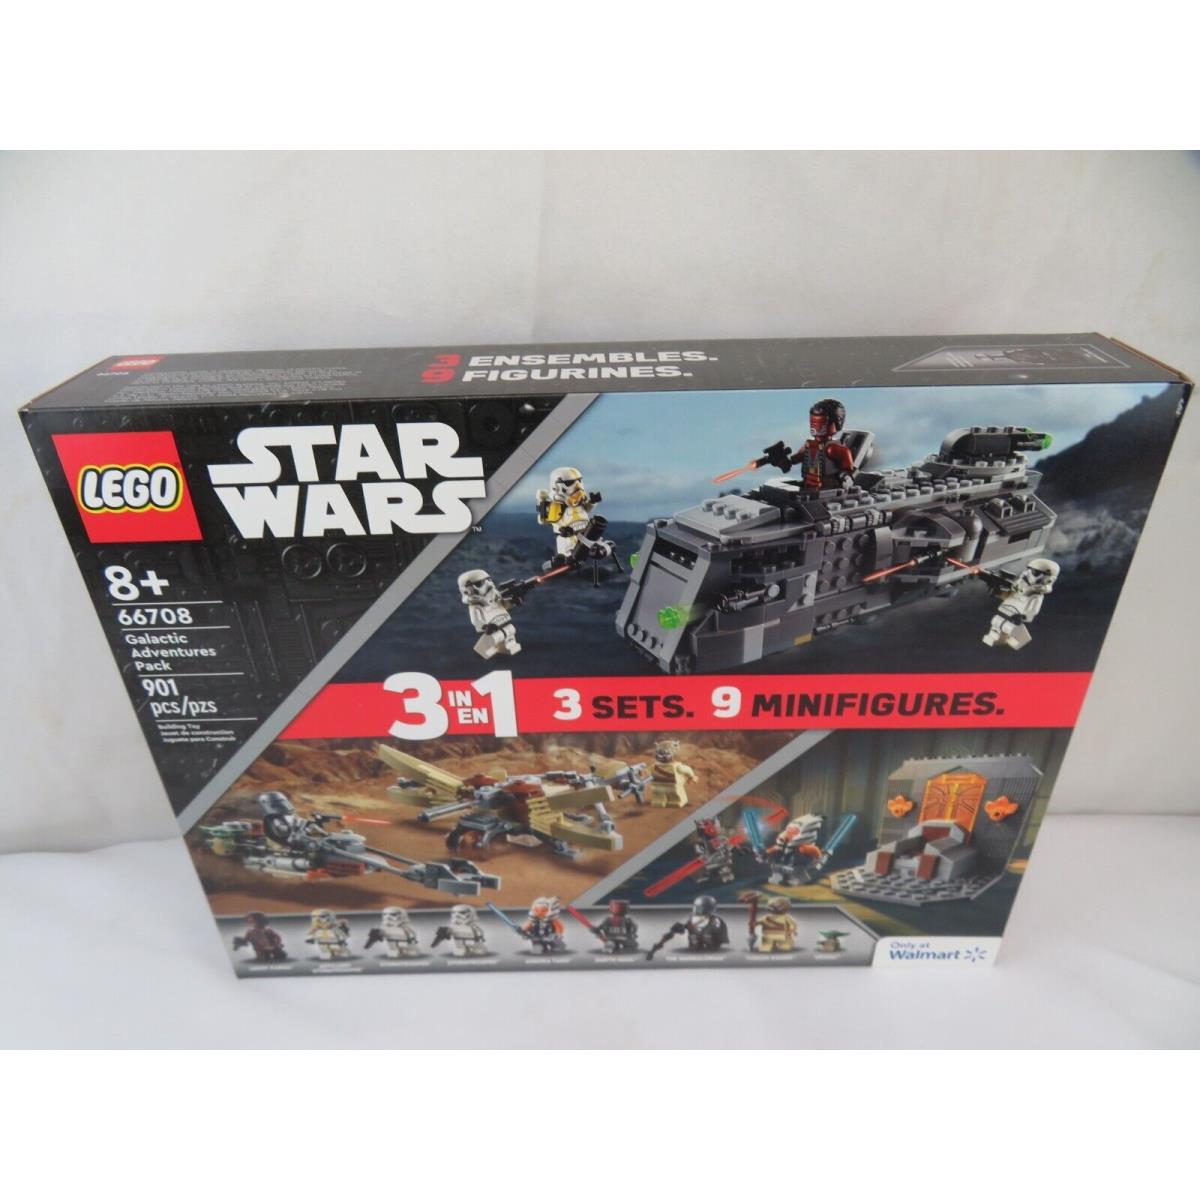 Lego Star Wars 66708 Galactic Adventures Pack 3 in 1 75311 75310 75299